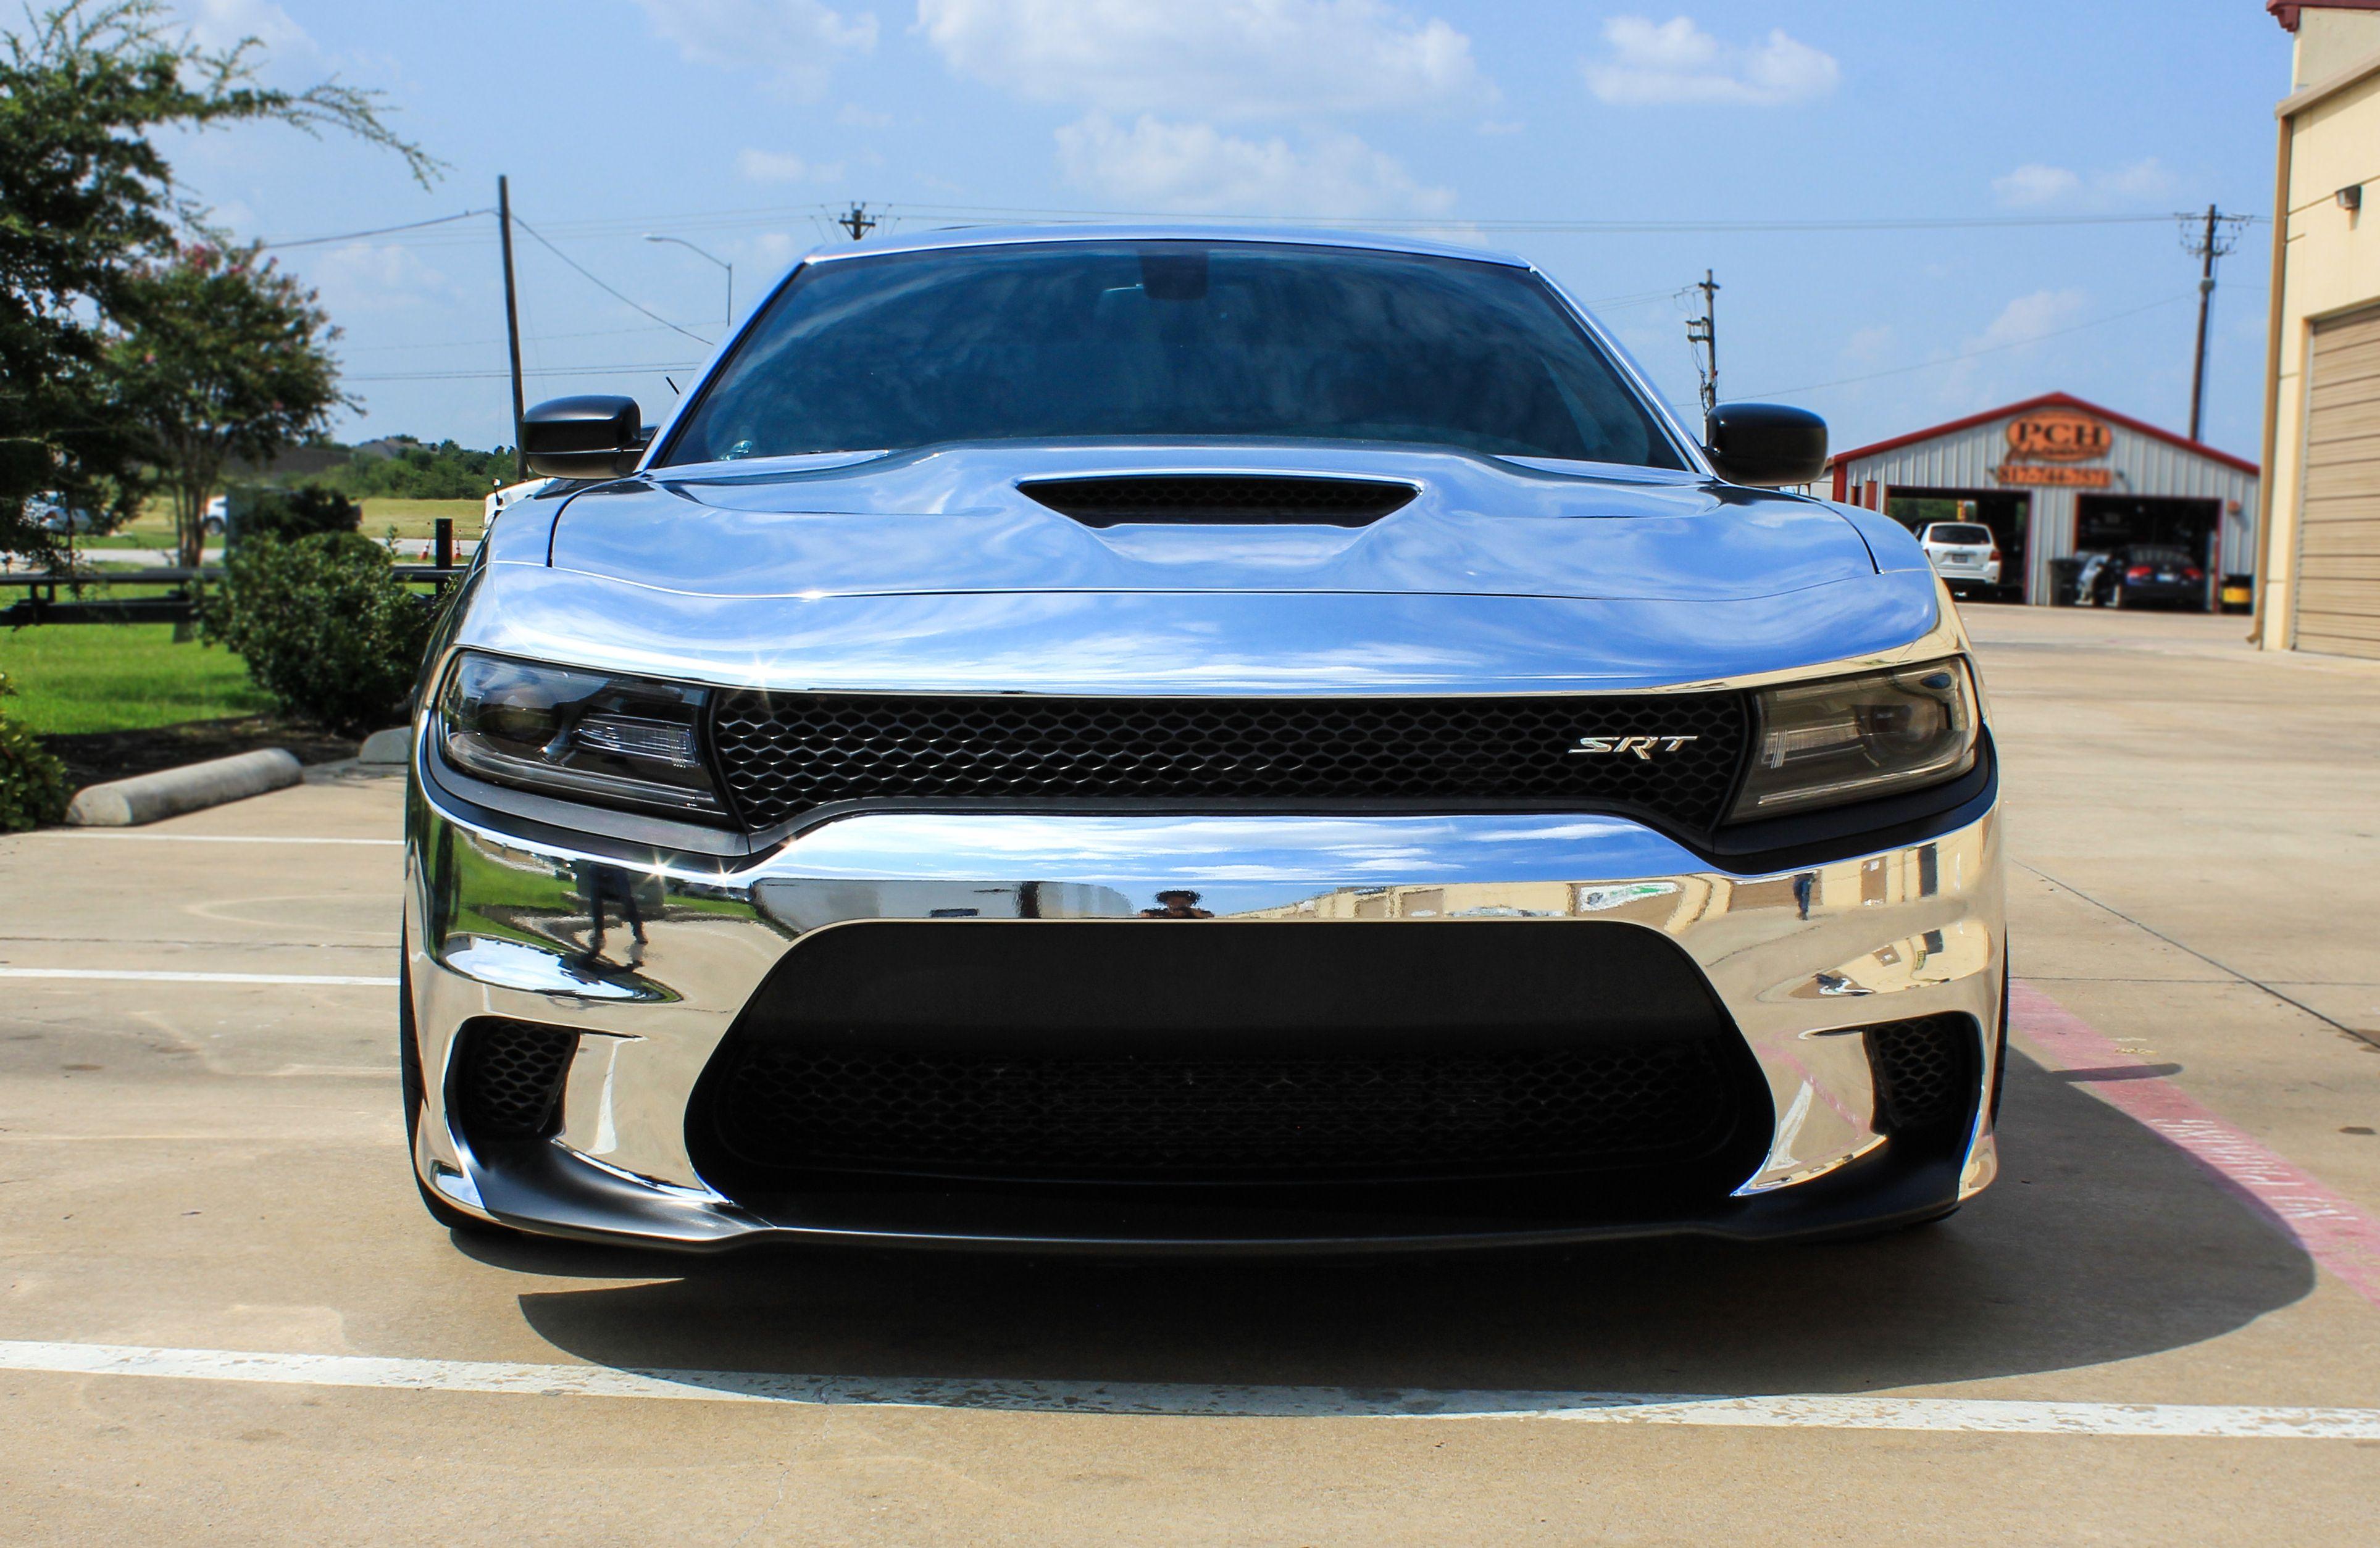 Chrome Hellcat Charger. Metallic, Specialty and Chrome